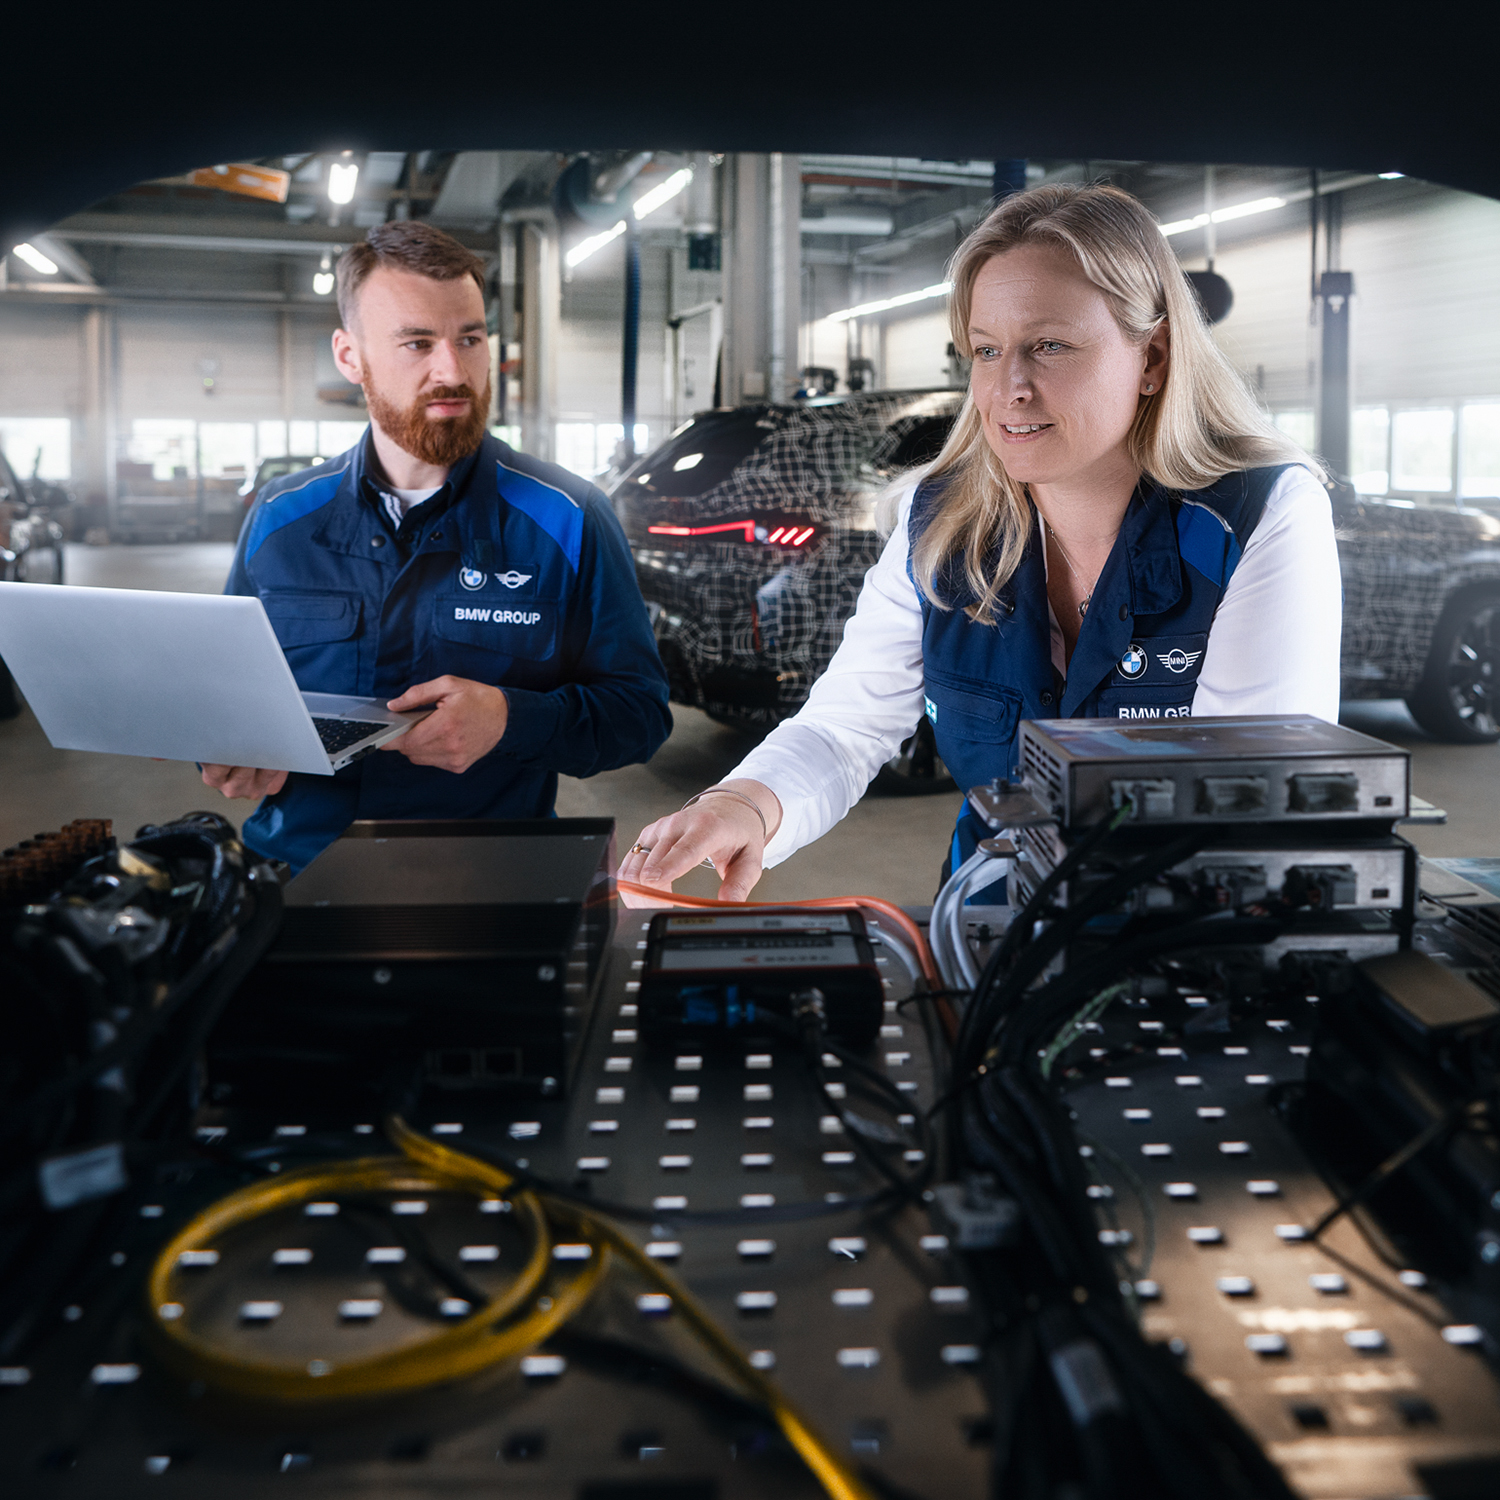 Two BMW Group engineers work on a technical device in the boot.